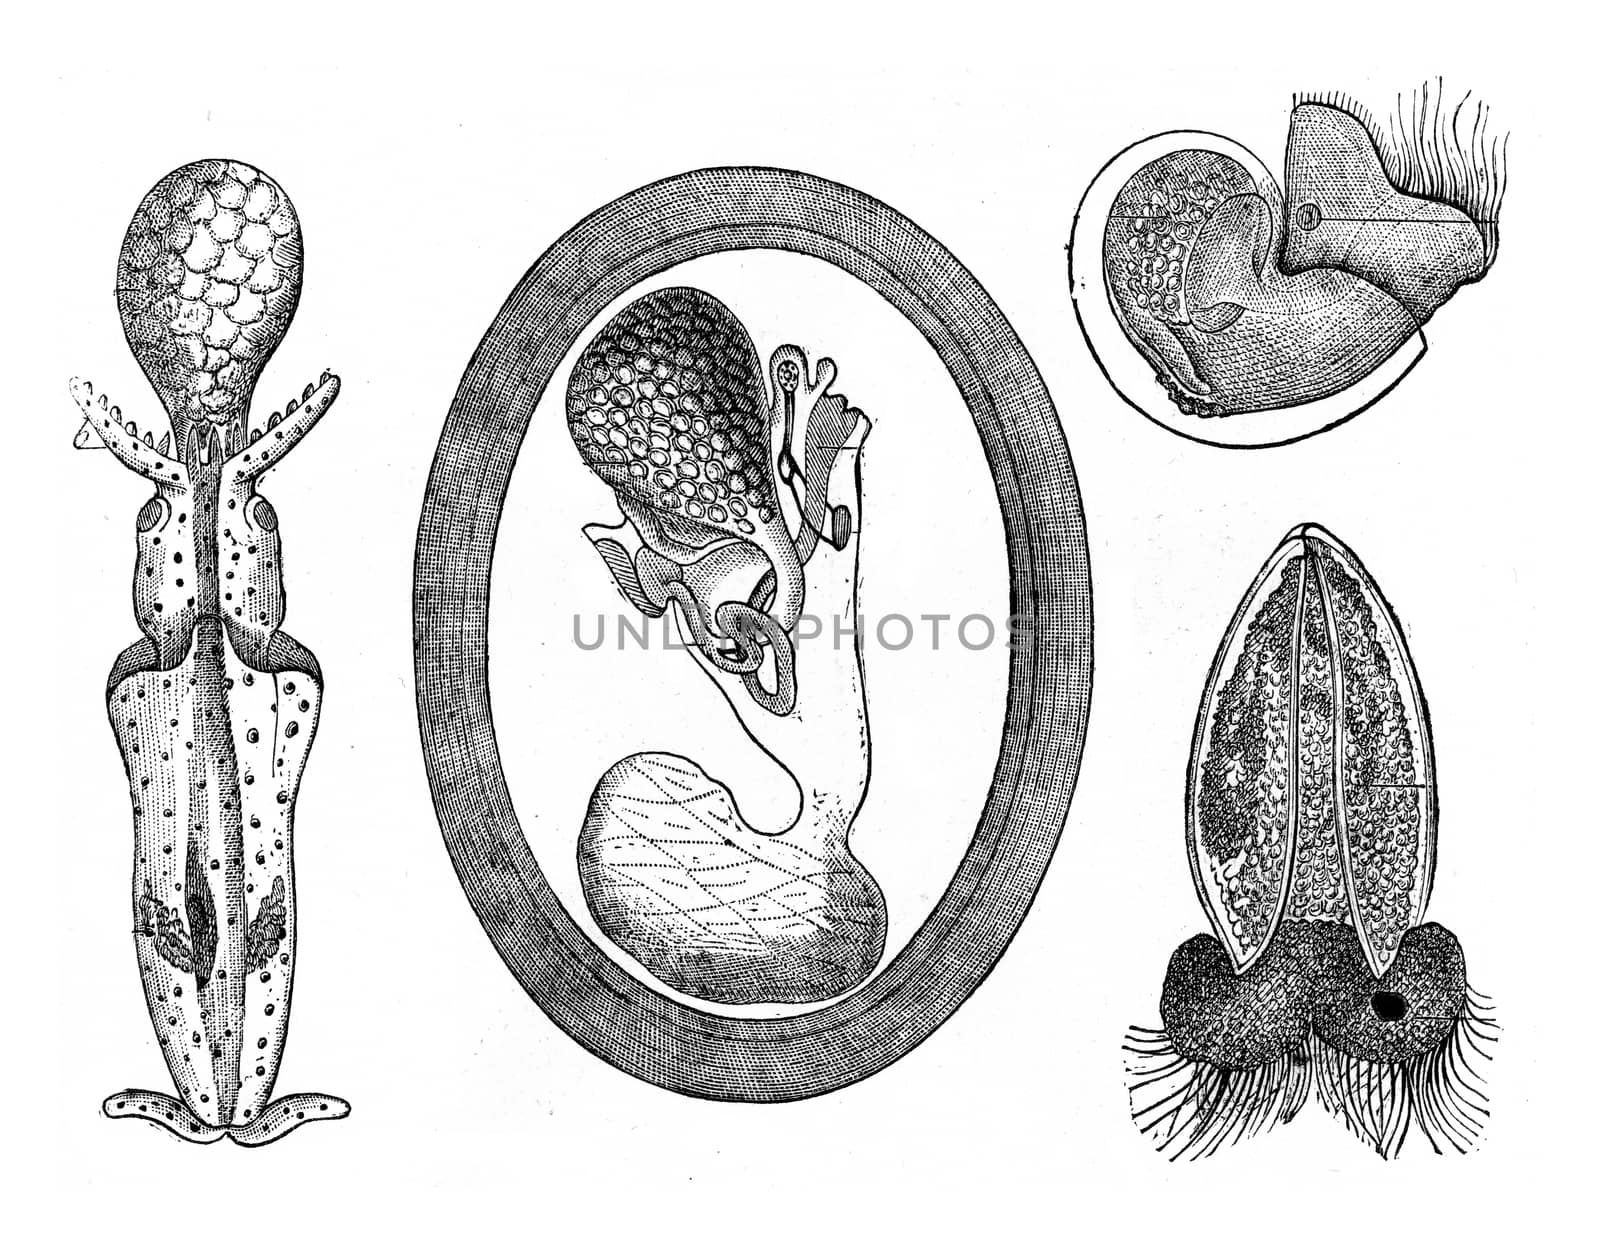 Development of Molluscs, vintage engraved illustration. From Zoology Elements from Paul Gervais
